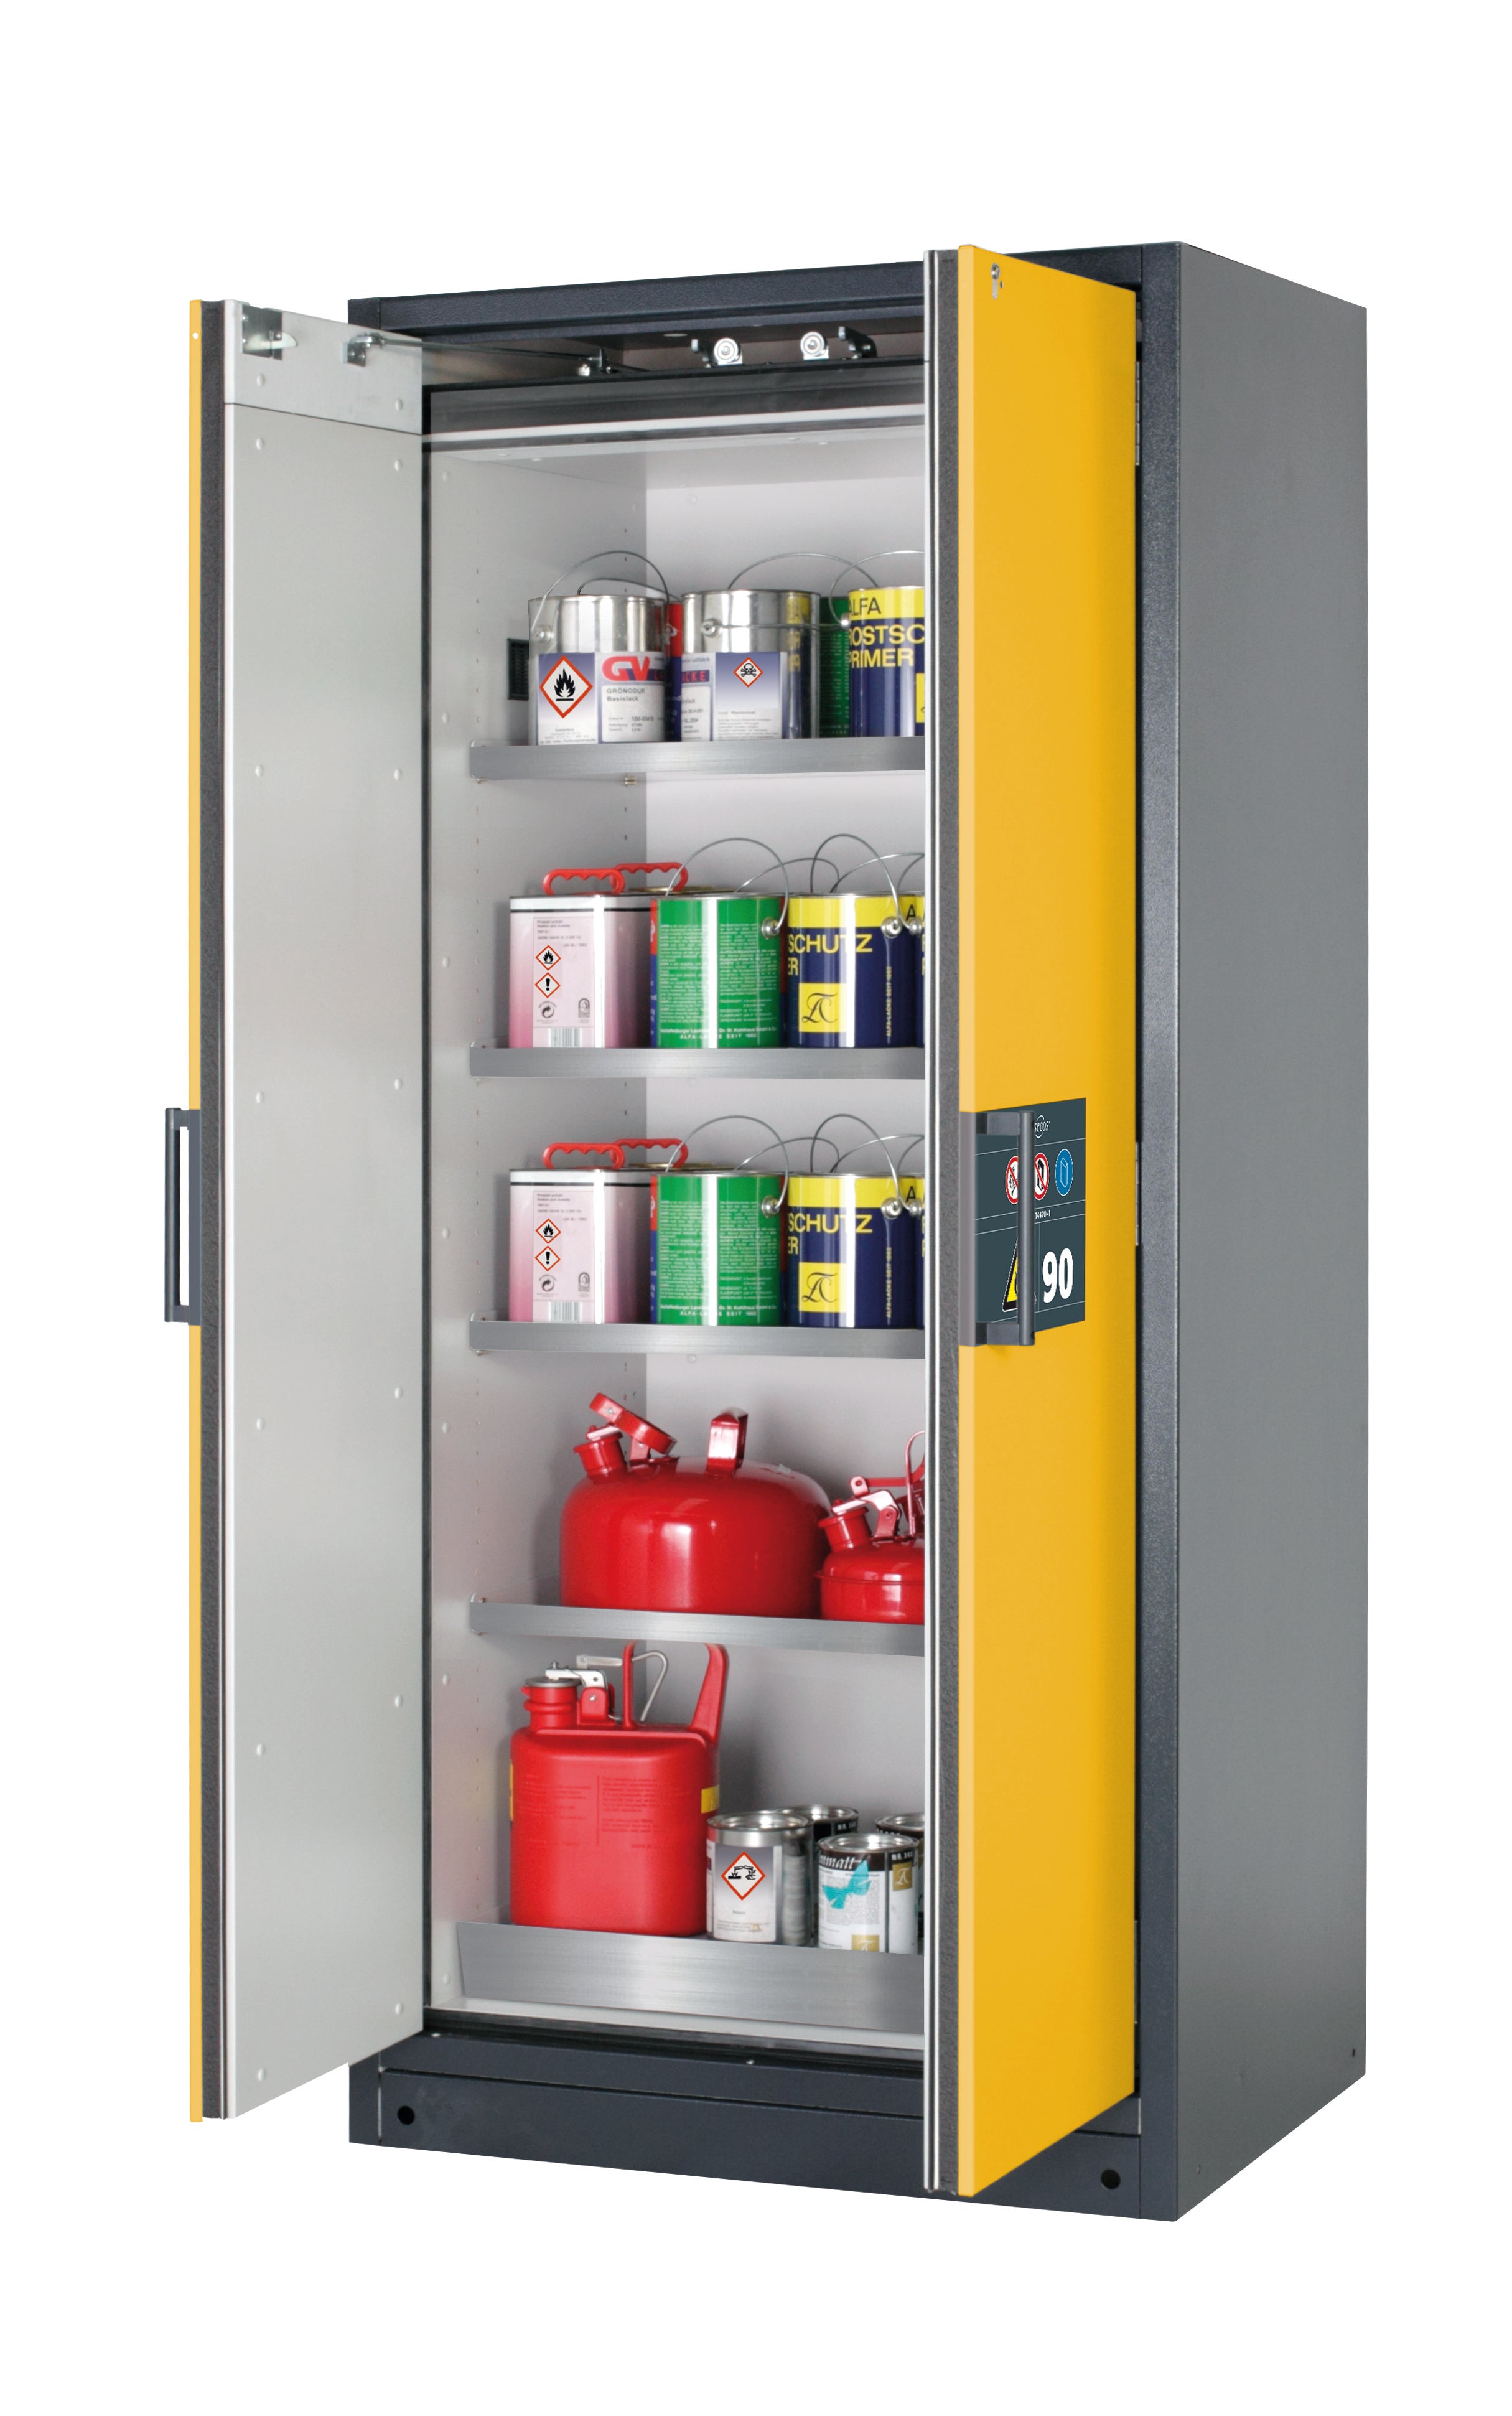 Type 90 safety storage cabinet Q-CLASSIC-90 model Q90.195.090 in warning yellow RAL 1004 with 4x shelf standard (stainless steel 1.4301),